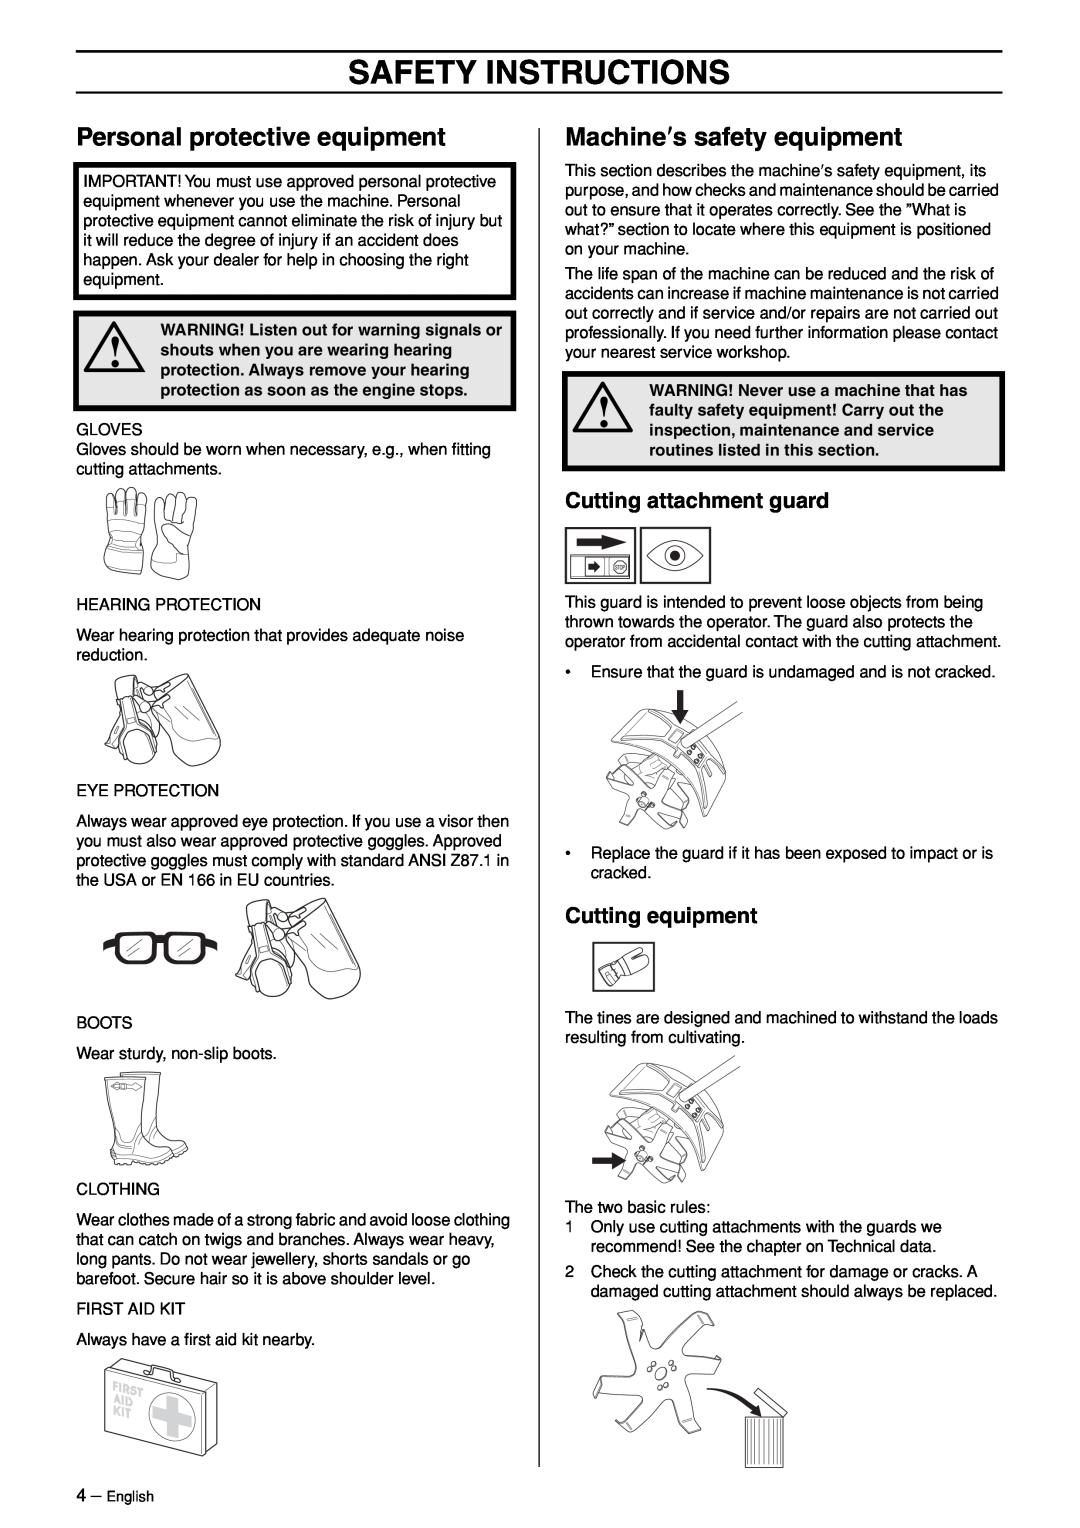 Husqvarna CA 150 Safety Instructions, Personal protective equipment, Machine′s safety equipment, Cutting attachment guard 